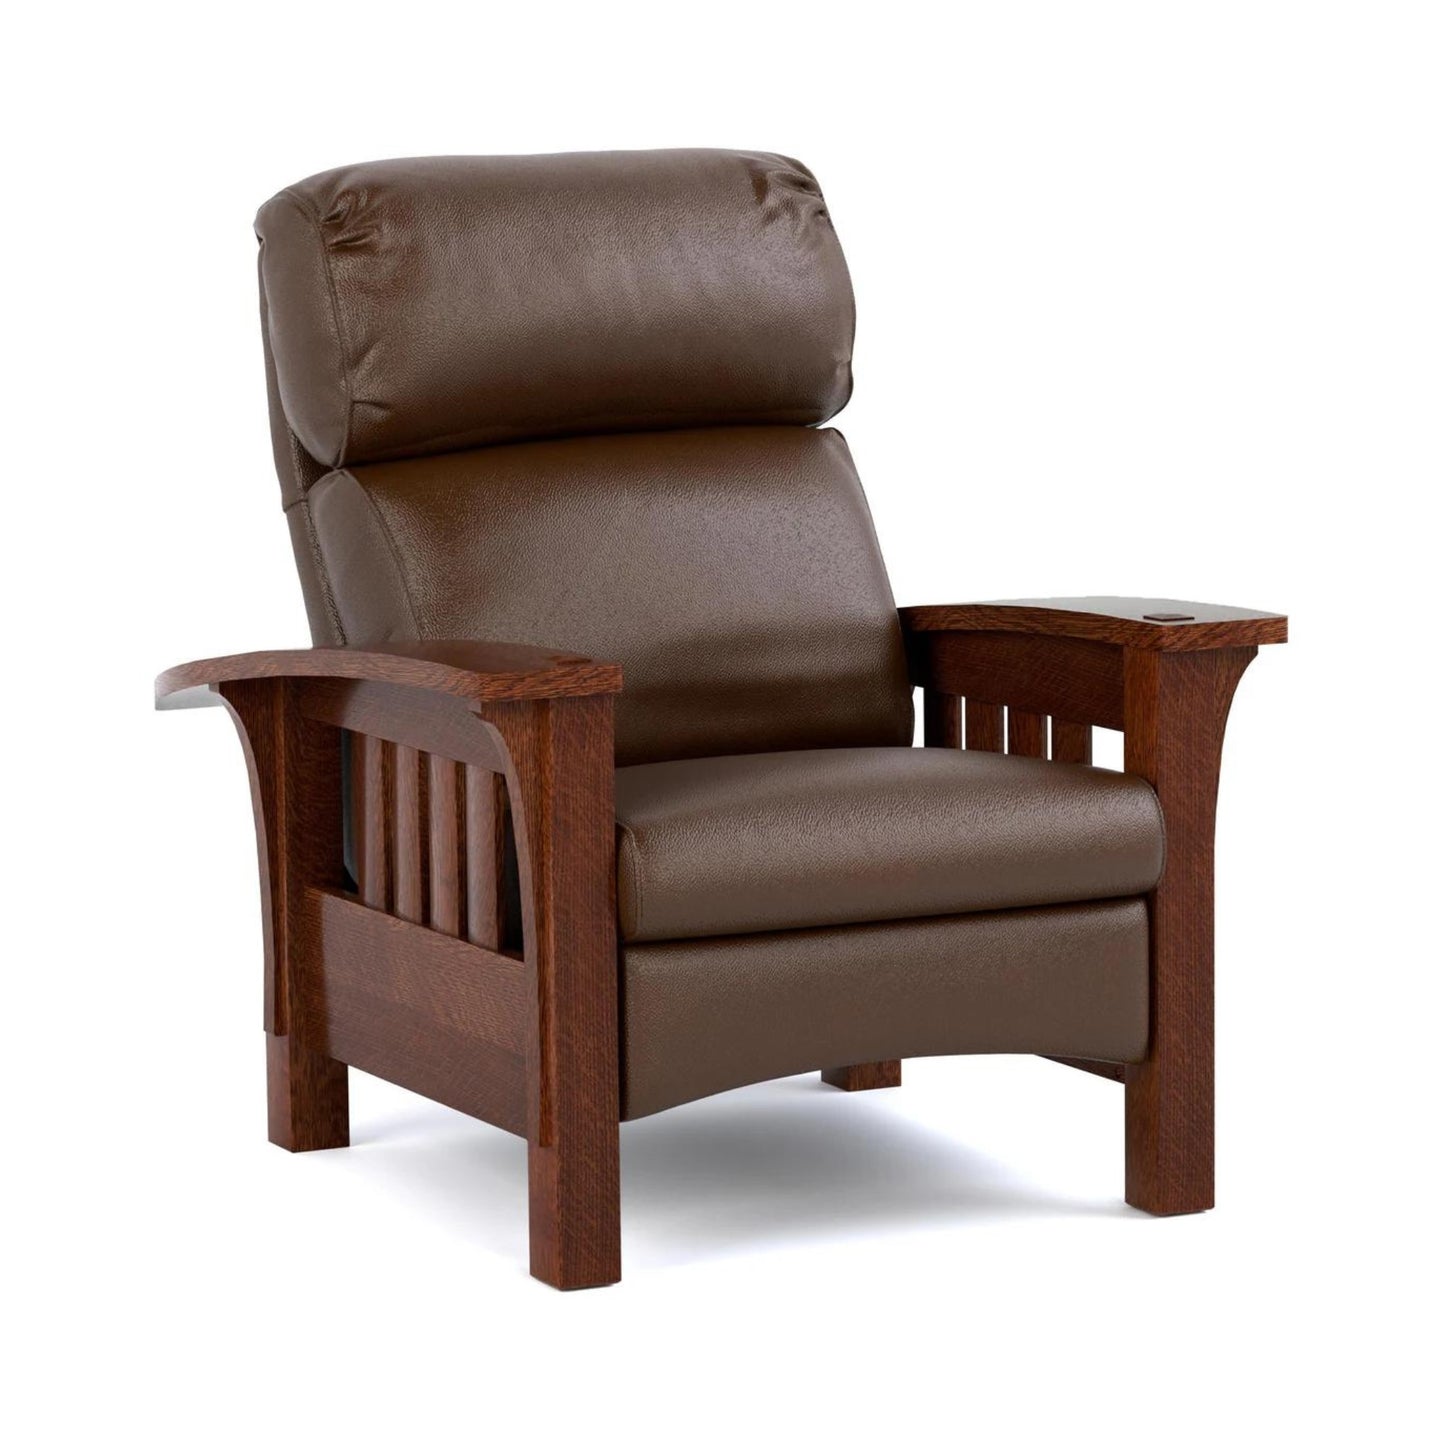 Bustle Back Bow Arm Recliner